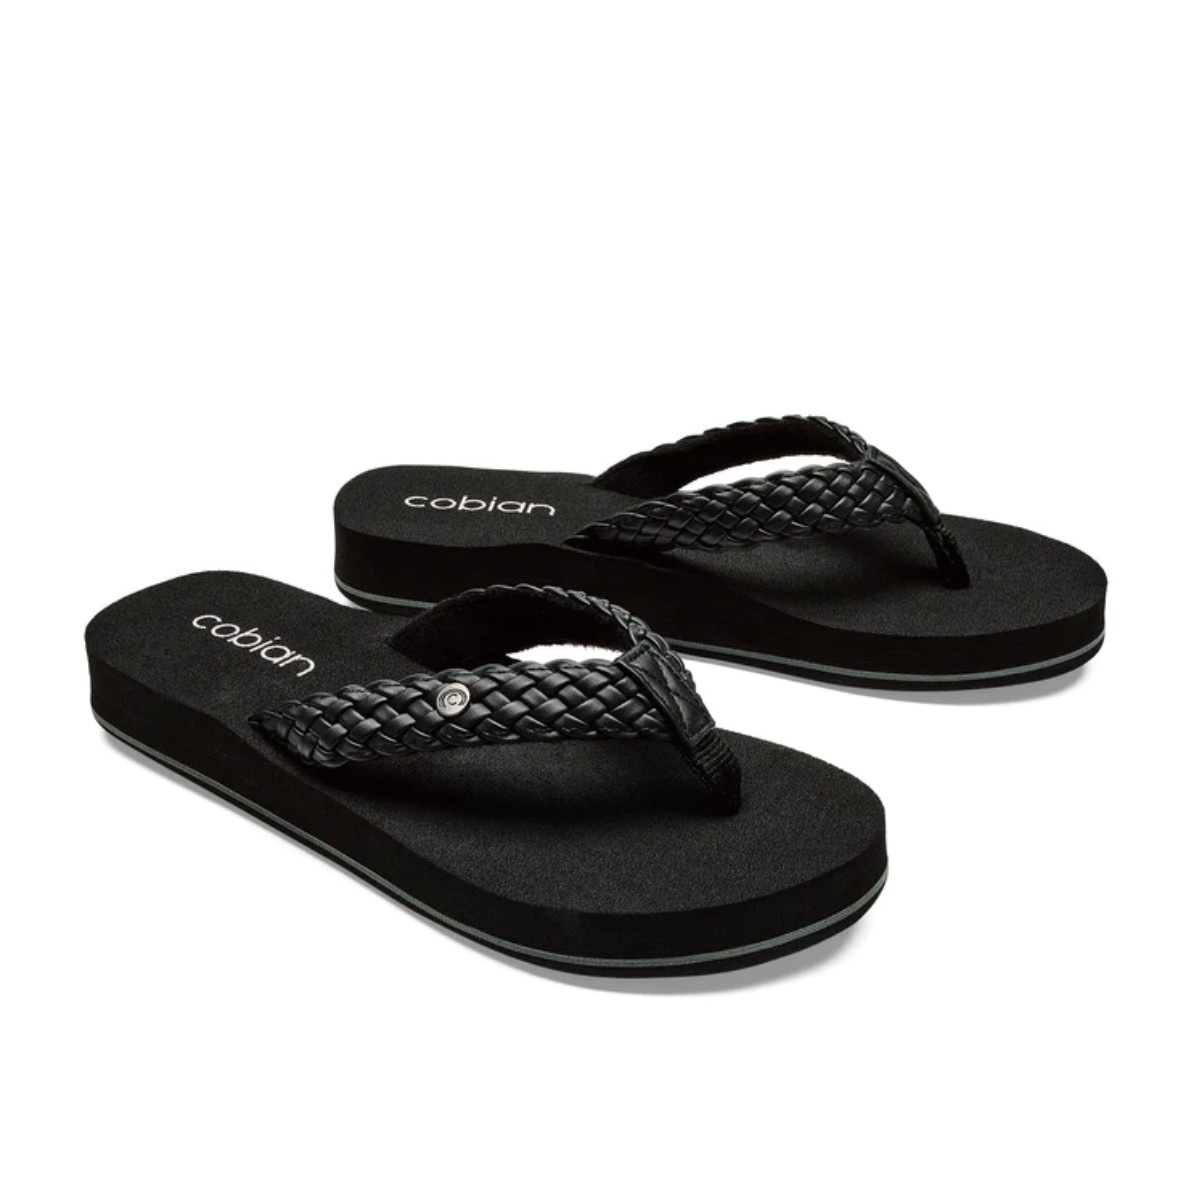 A pair of black Braided Bounce flip flops by Cobian on a white background.